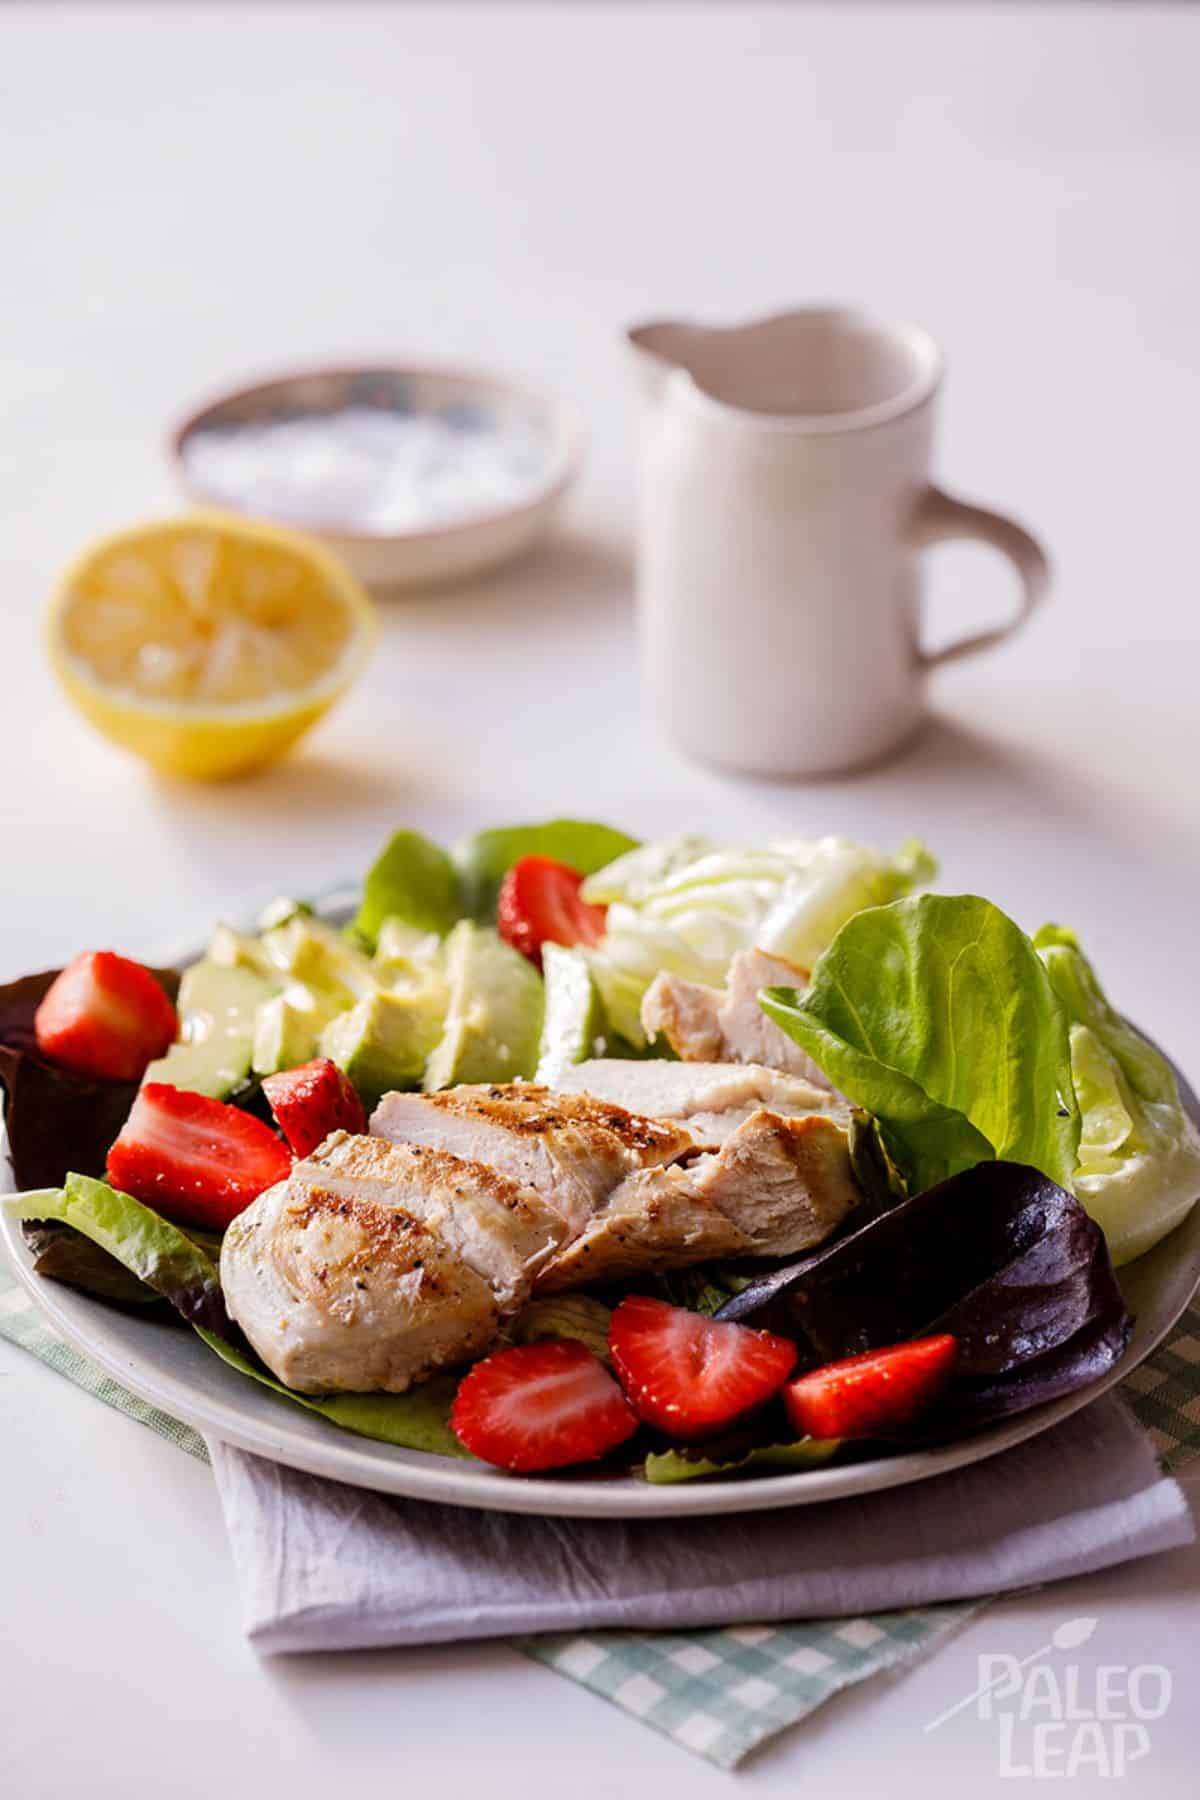 Grilled Chicken with Strawberry and Avocado Salad